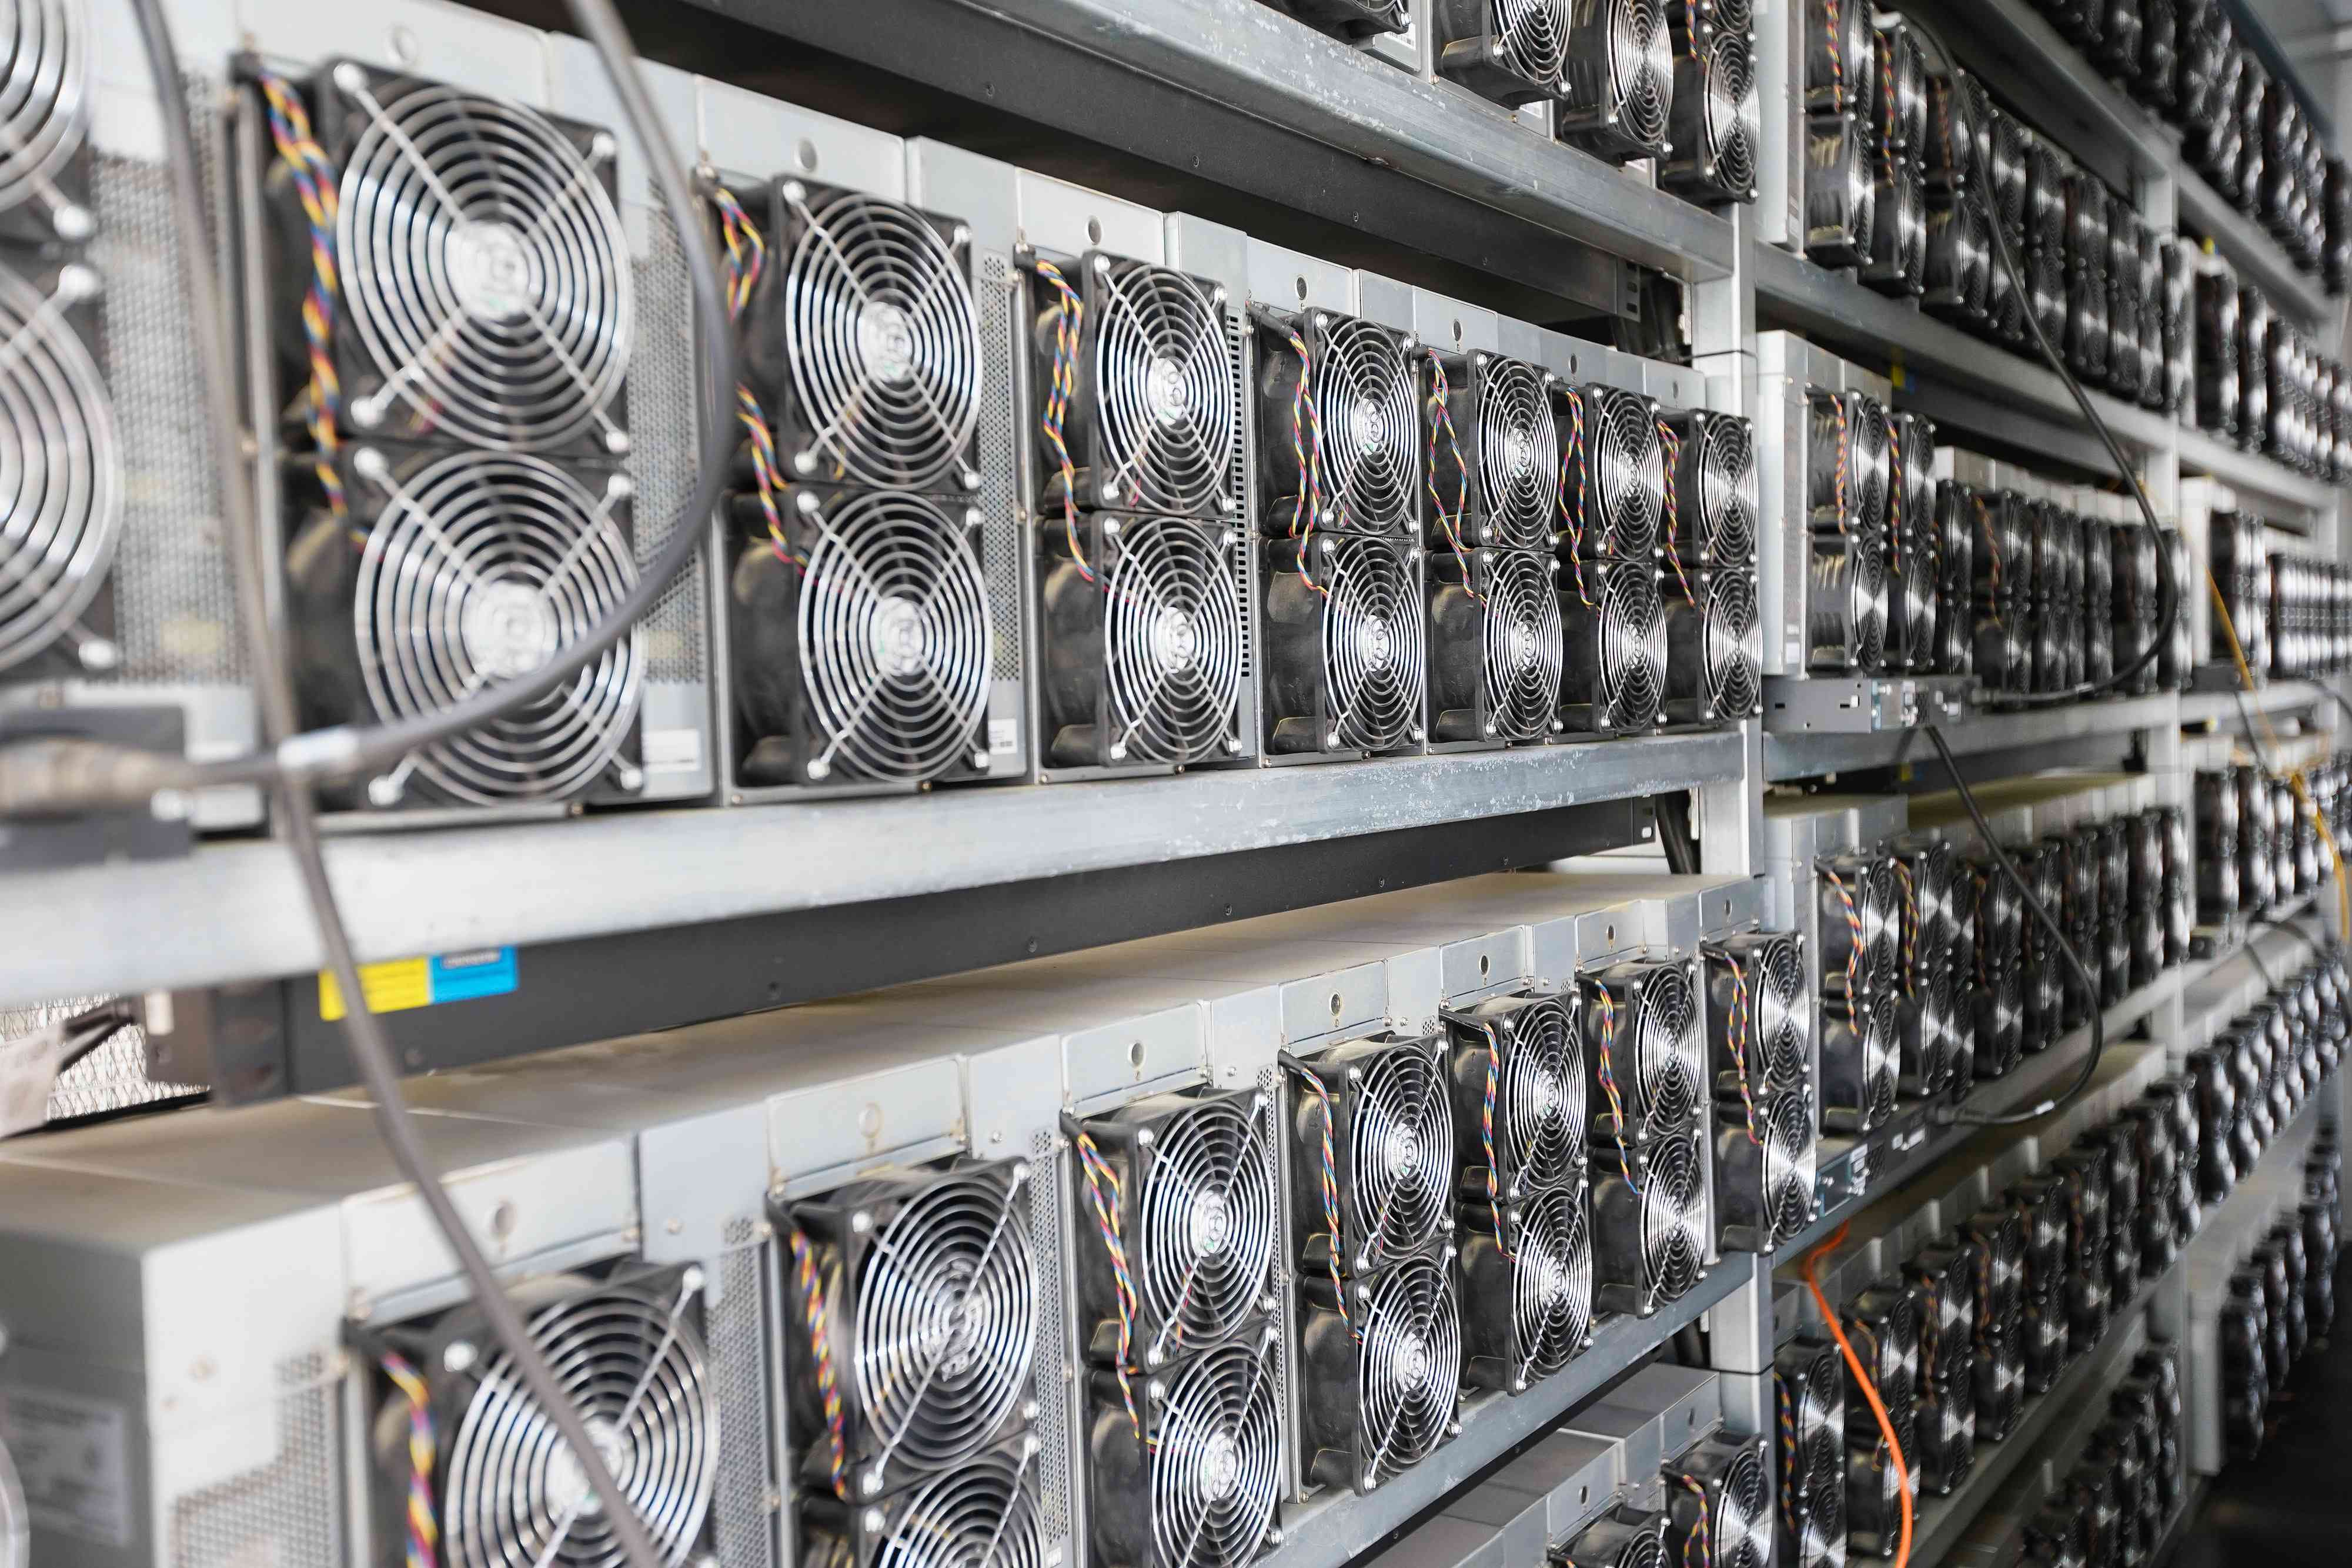 An array of bitcoin mining units is pictures inside a container at a CleanSpark facility in College Park, Georgia.